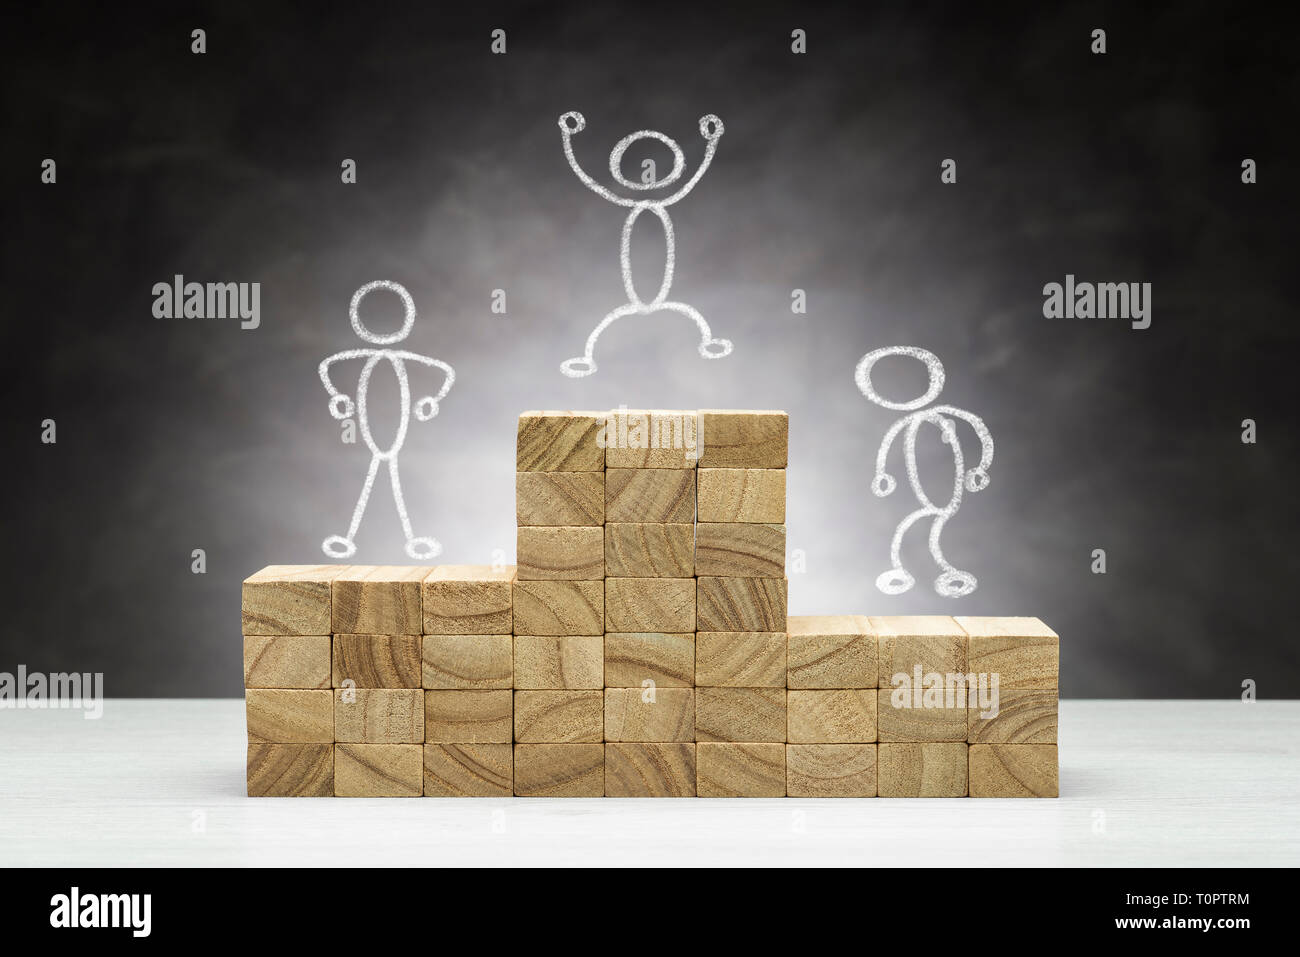 Concept of competition. Wooden podium on grey background with people shapes. Stock Photo